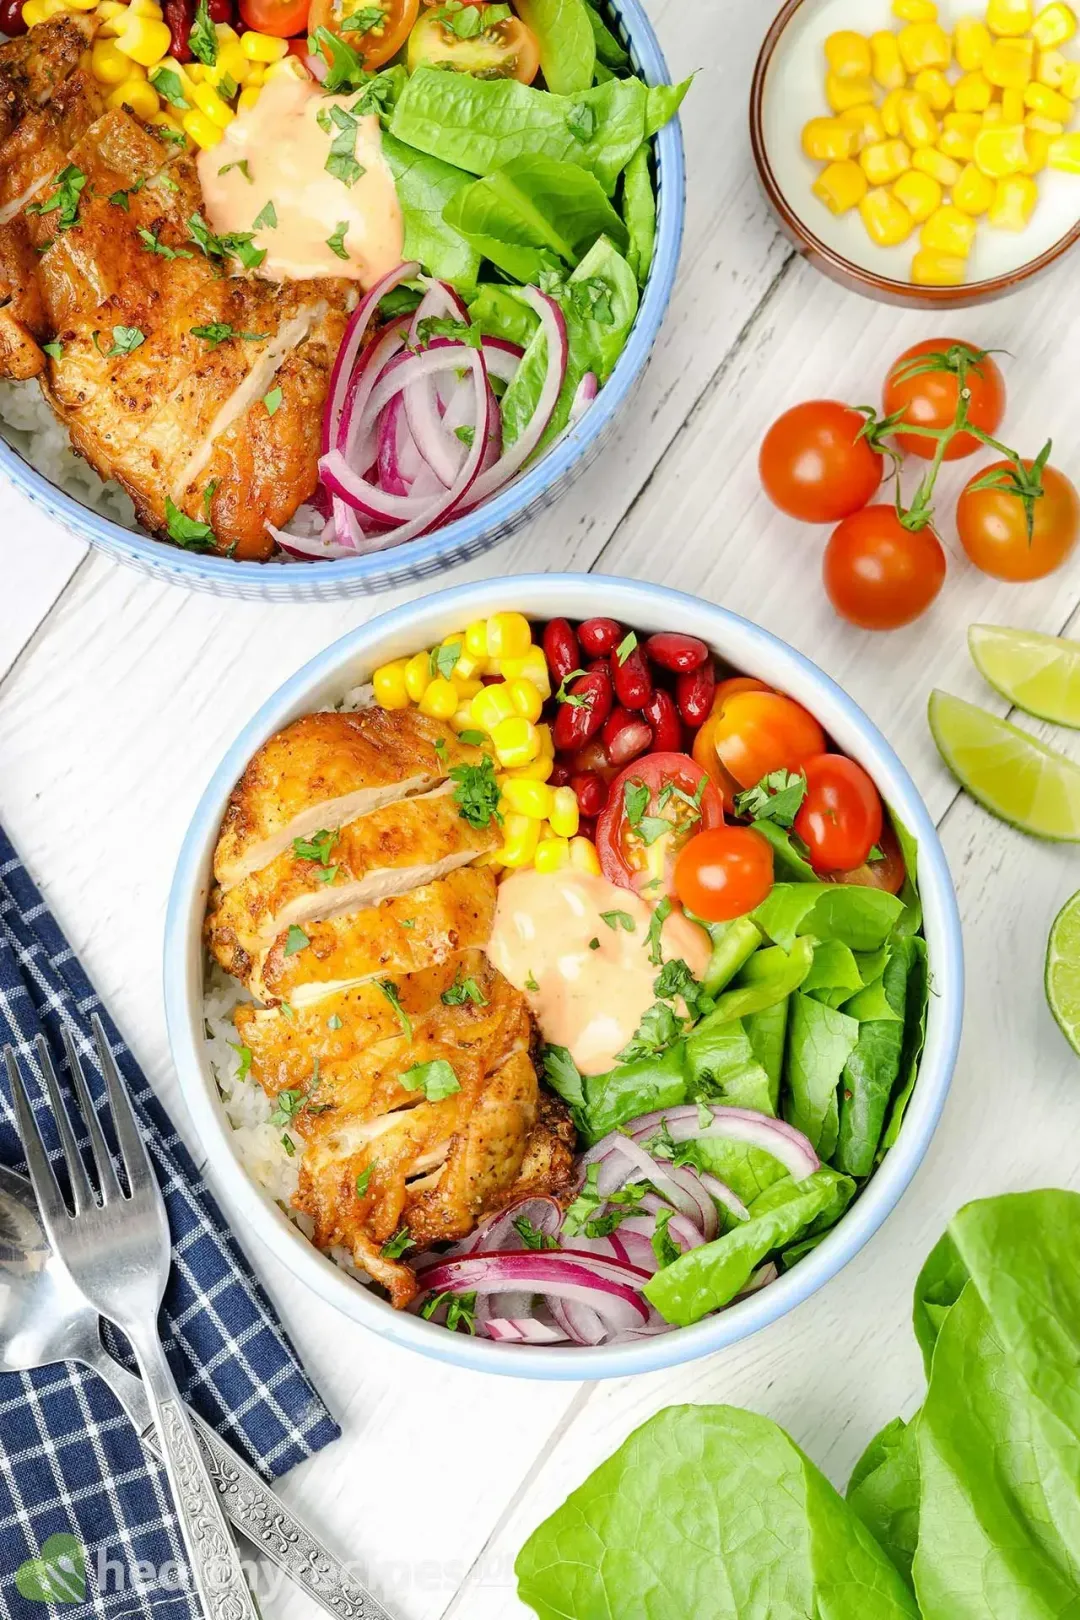 Chicken Bowl Recipe: A Perfect Mix of Chicken, Rice, and Veggies